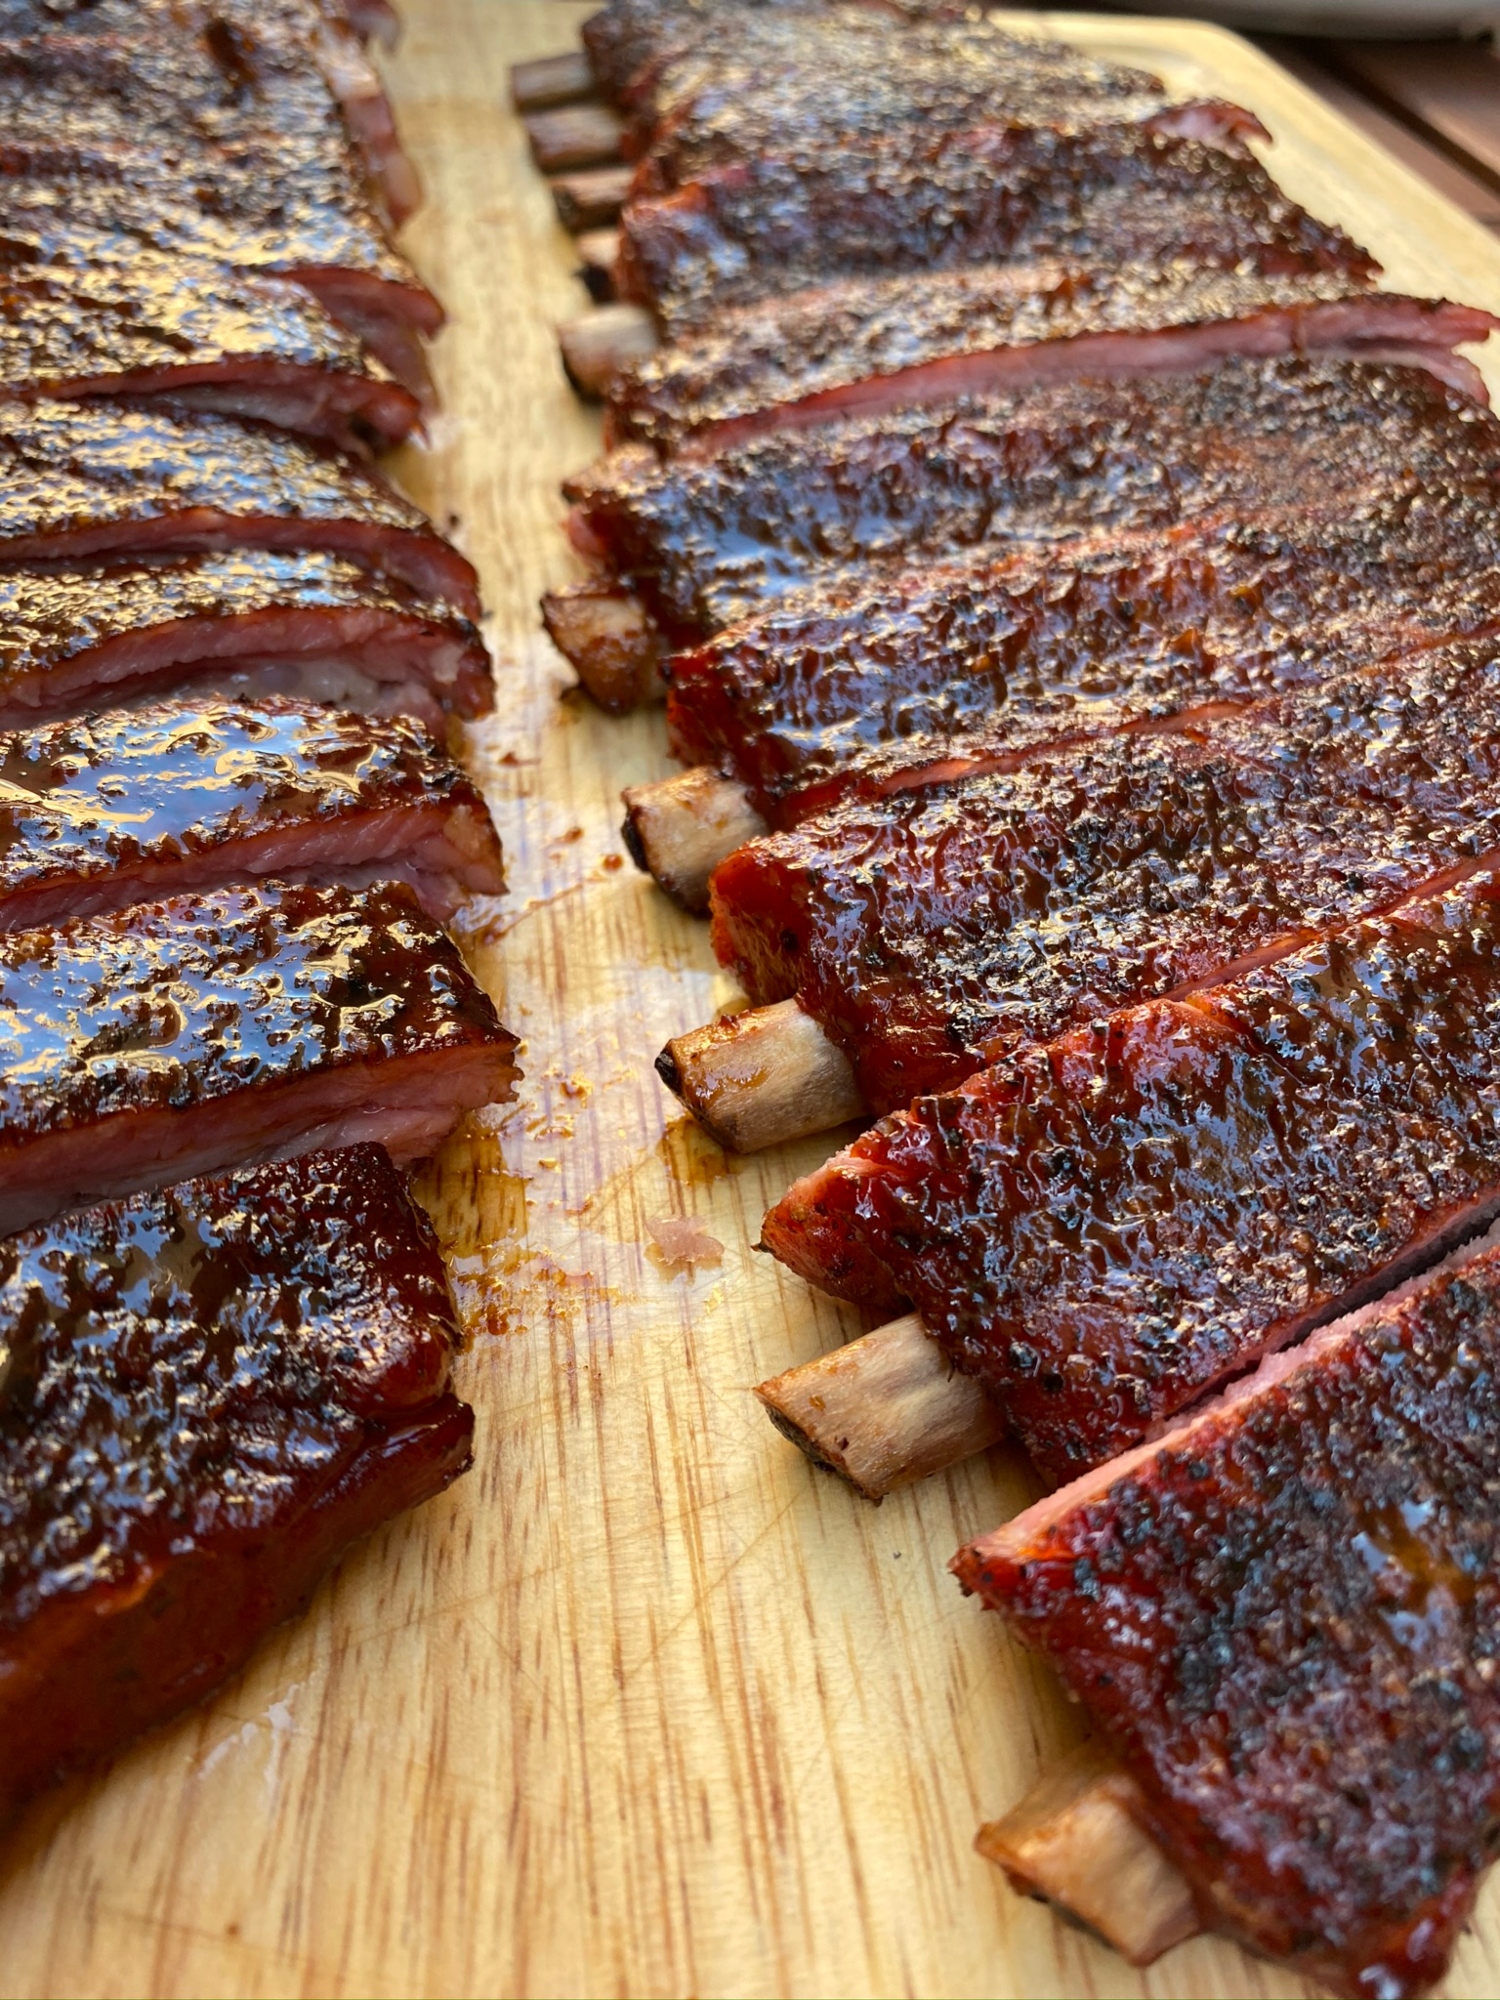 Hickory Smoked St. Louis Style Ribs Recipe - TomCat BBQ